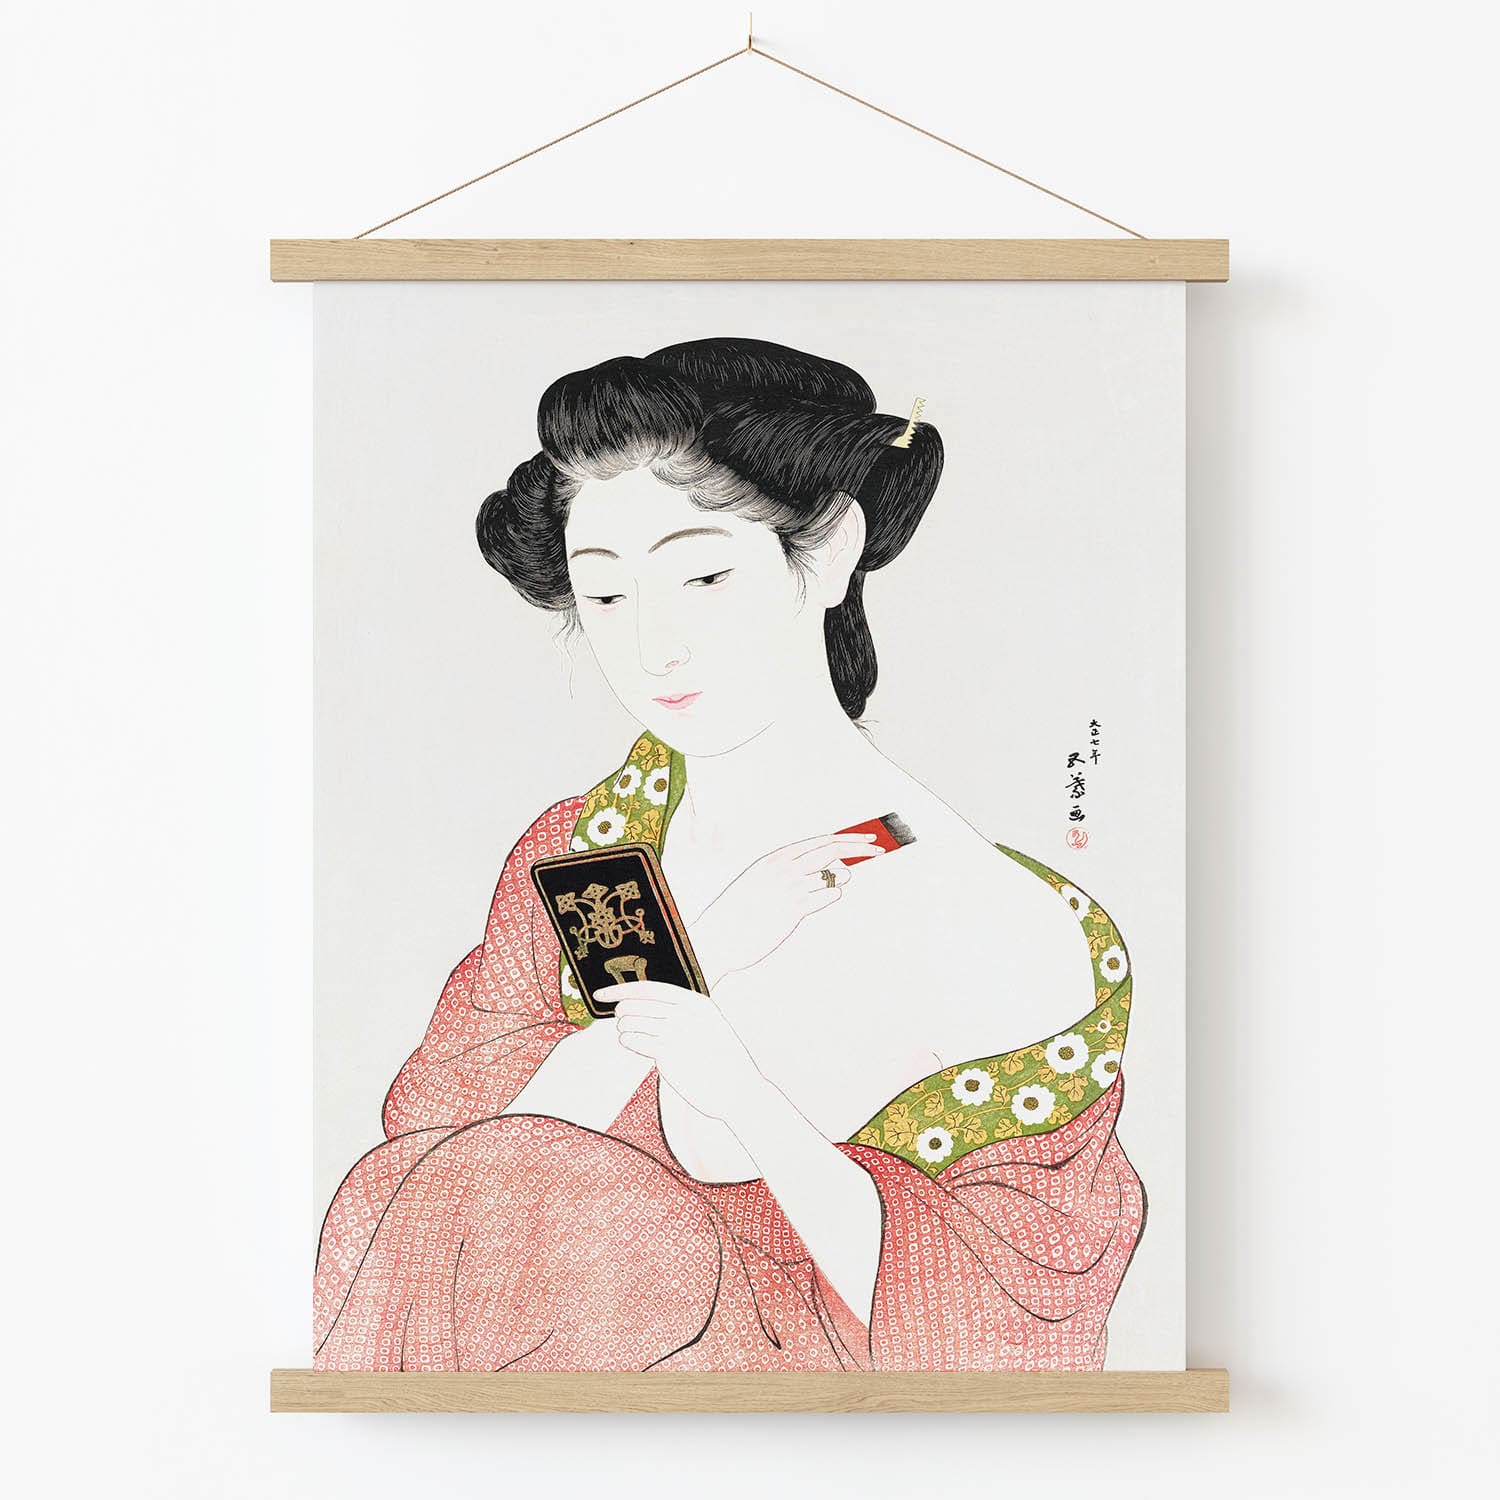 Green and Red Kimono Art Print in Wood Hanger Frame on Wall